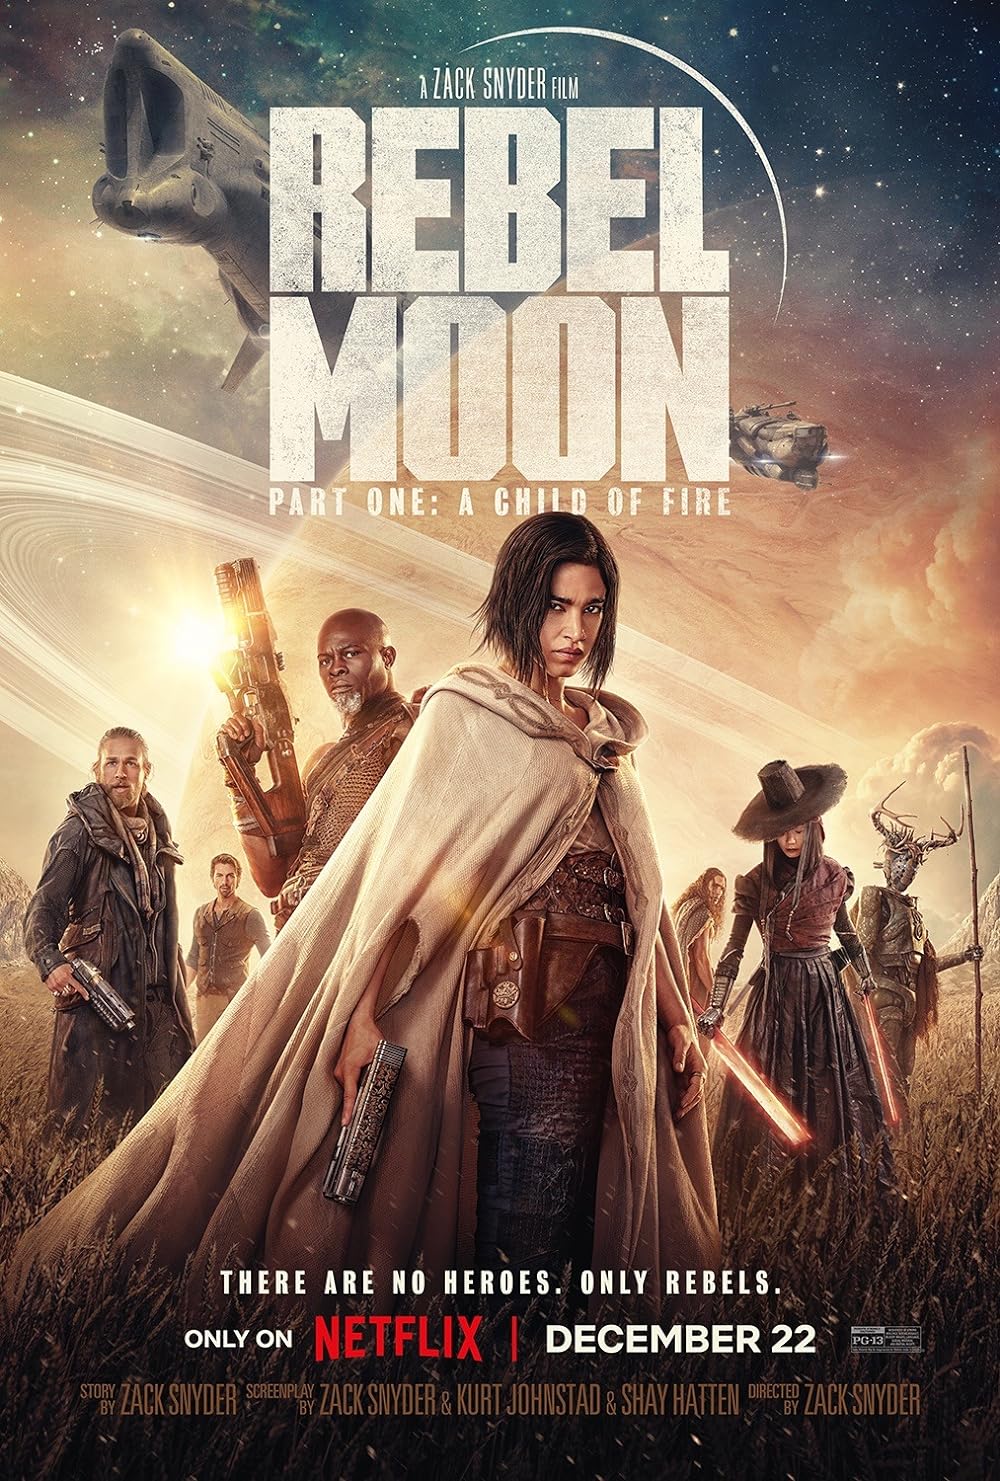 Rebel Moon - Part One: A Child of Fire (December 21) - Streaming on NetflixRebel Moon - Part One: A Child of Fire narrates Kora's quest to assemble skilled warriors from various planets, uniting against an oppressive regime. Helmed by Zack Snyder, the series features Sofia Boutella, Charlie Hunnam, Djimon Hounsou, Ray Fisher, and others.